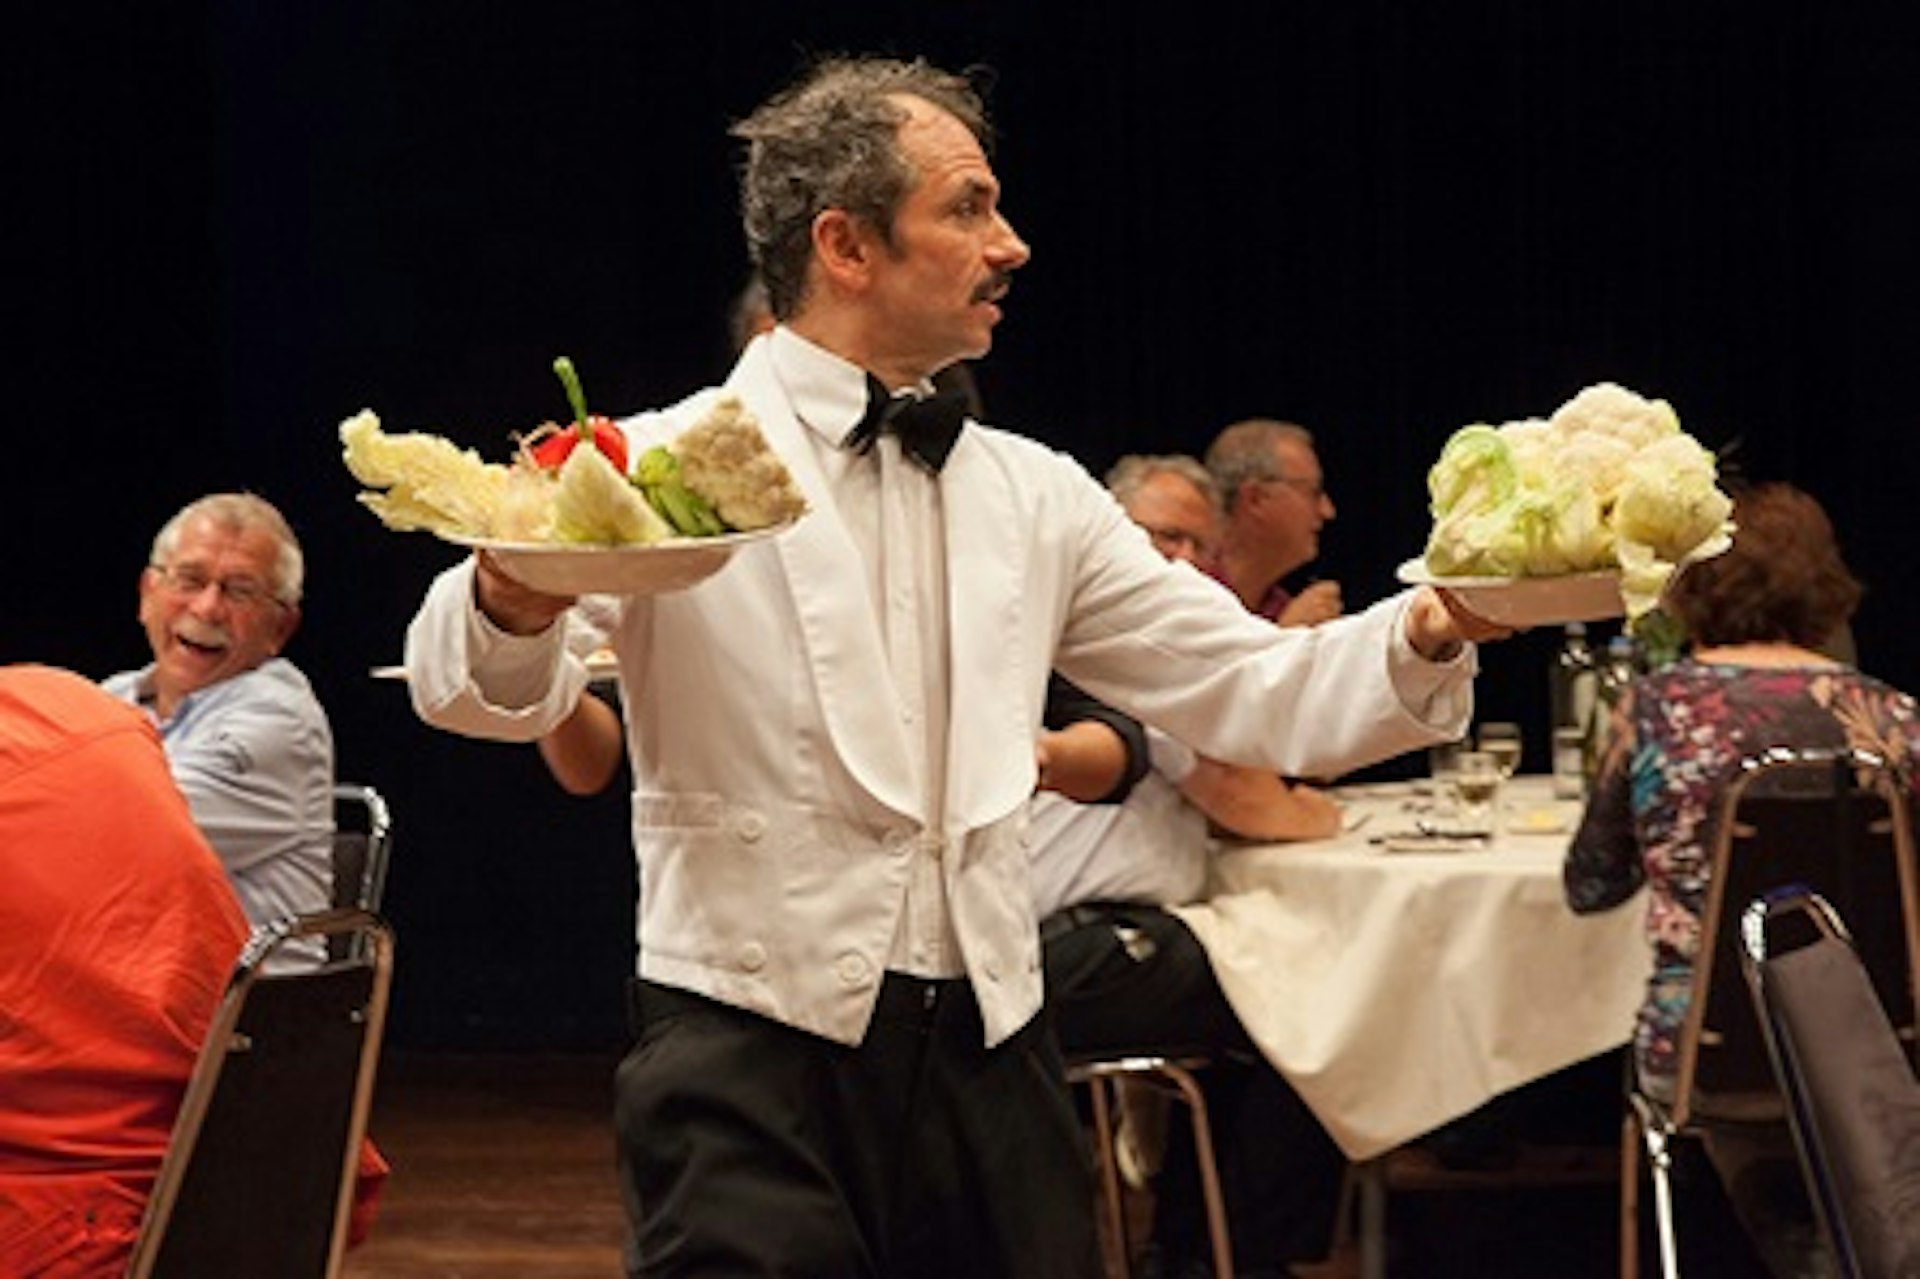 Faulty Towers The Dining Experience for Two 2